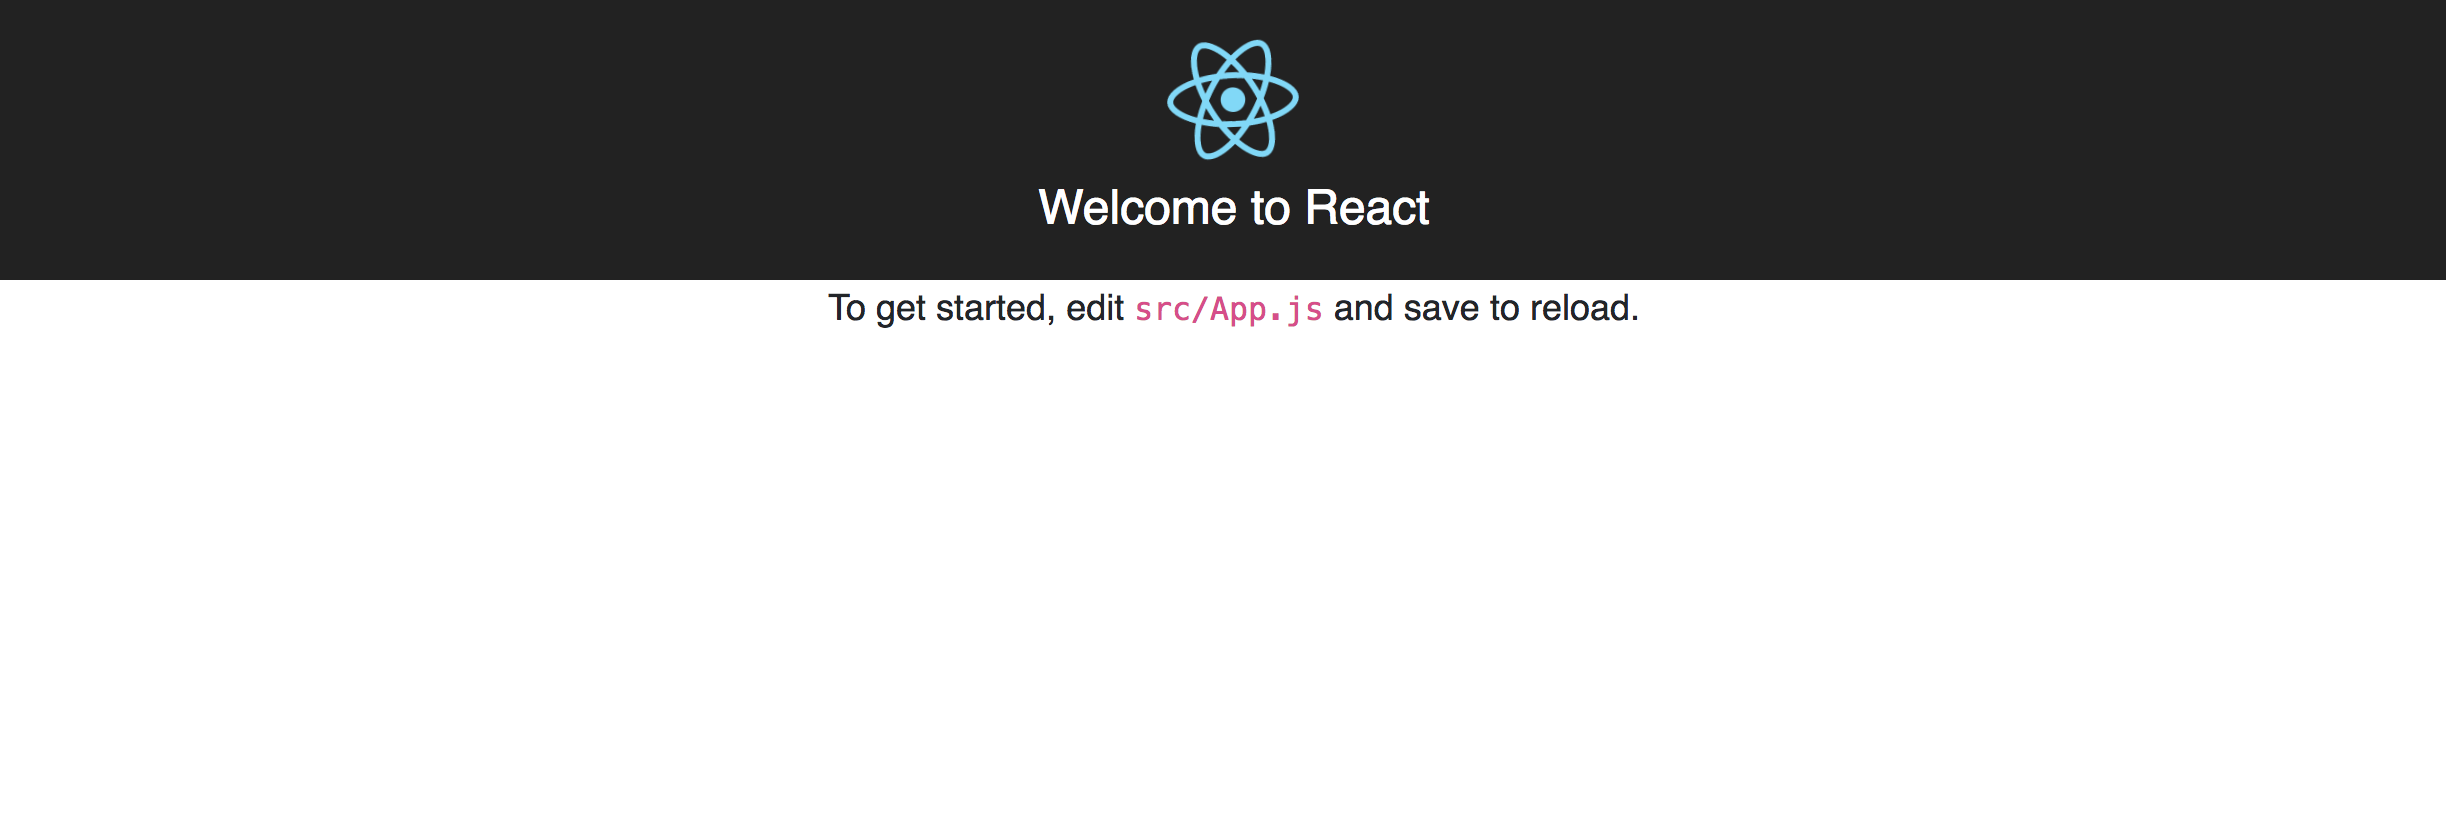 Initial View – Welcome to React Screen